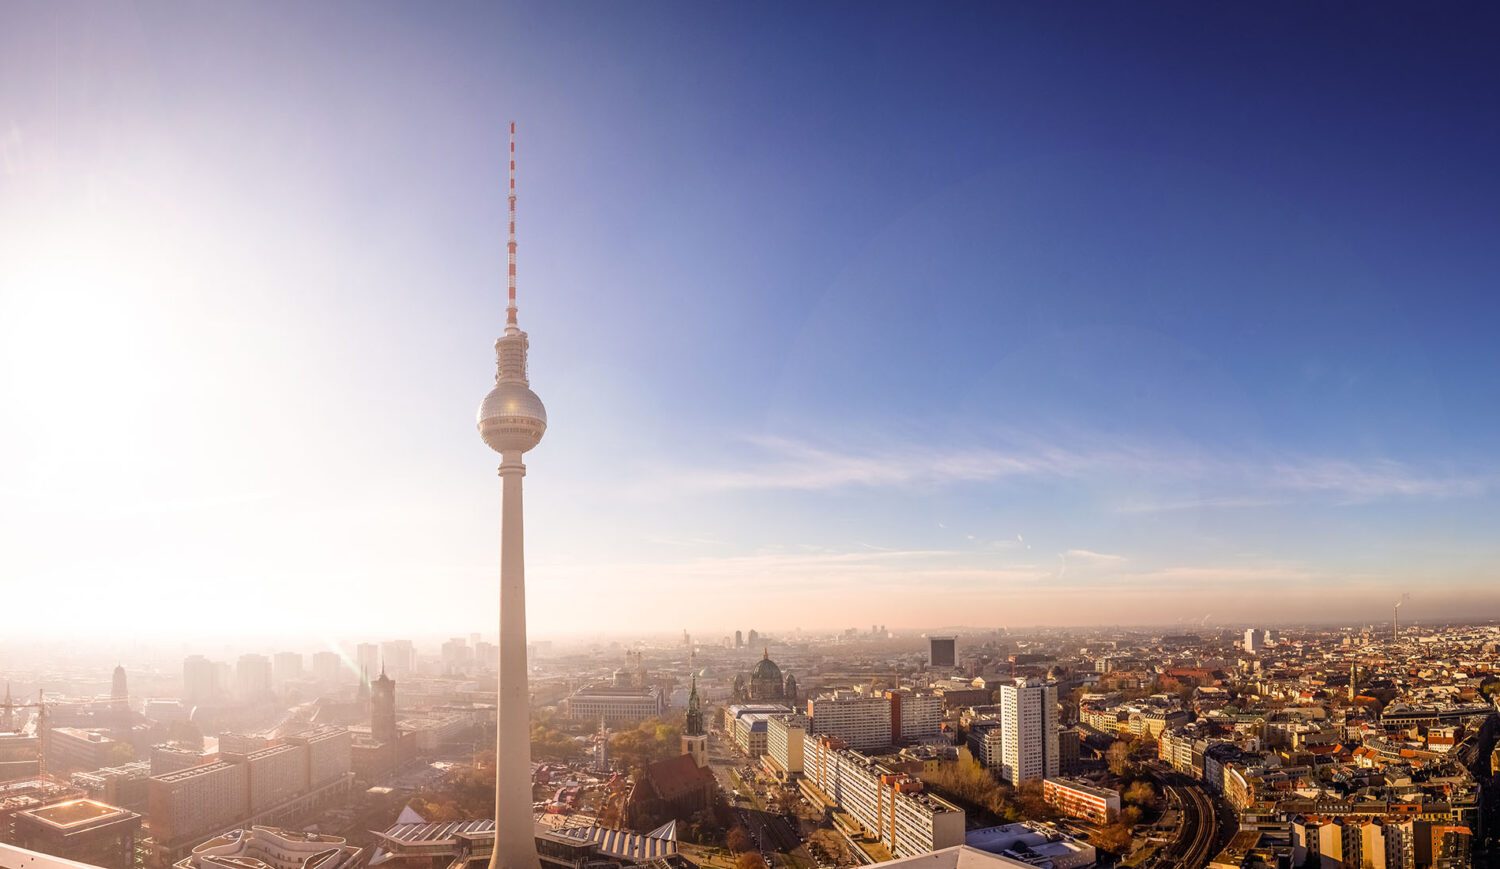 The television tower is one of the most popular sights in Germany